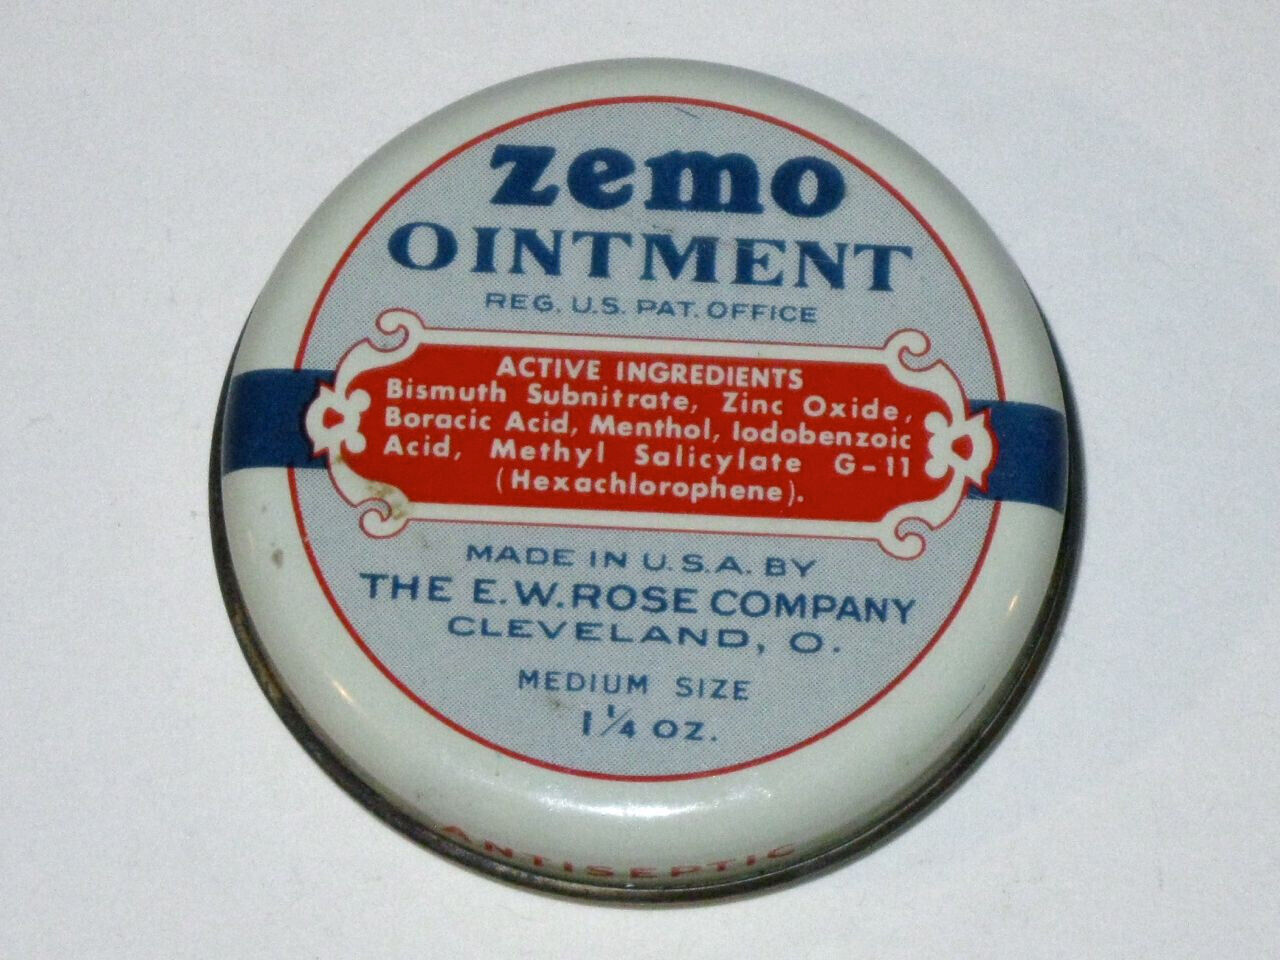 Vintage 1920s-1930s ZEMO OINTMENT Advertising Tin E. W. ROSE (Cleveland Ohio)